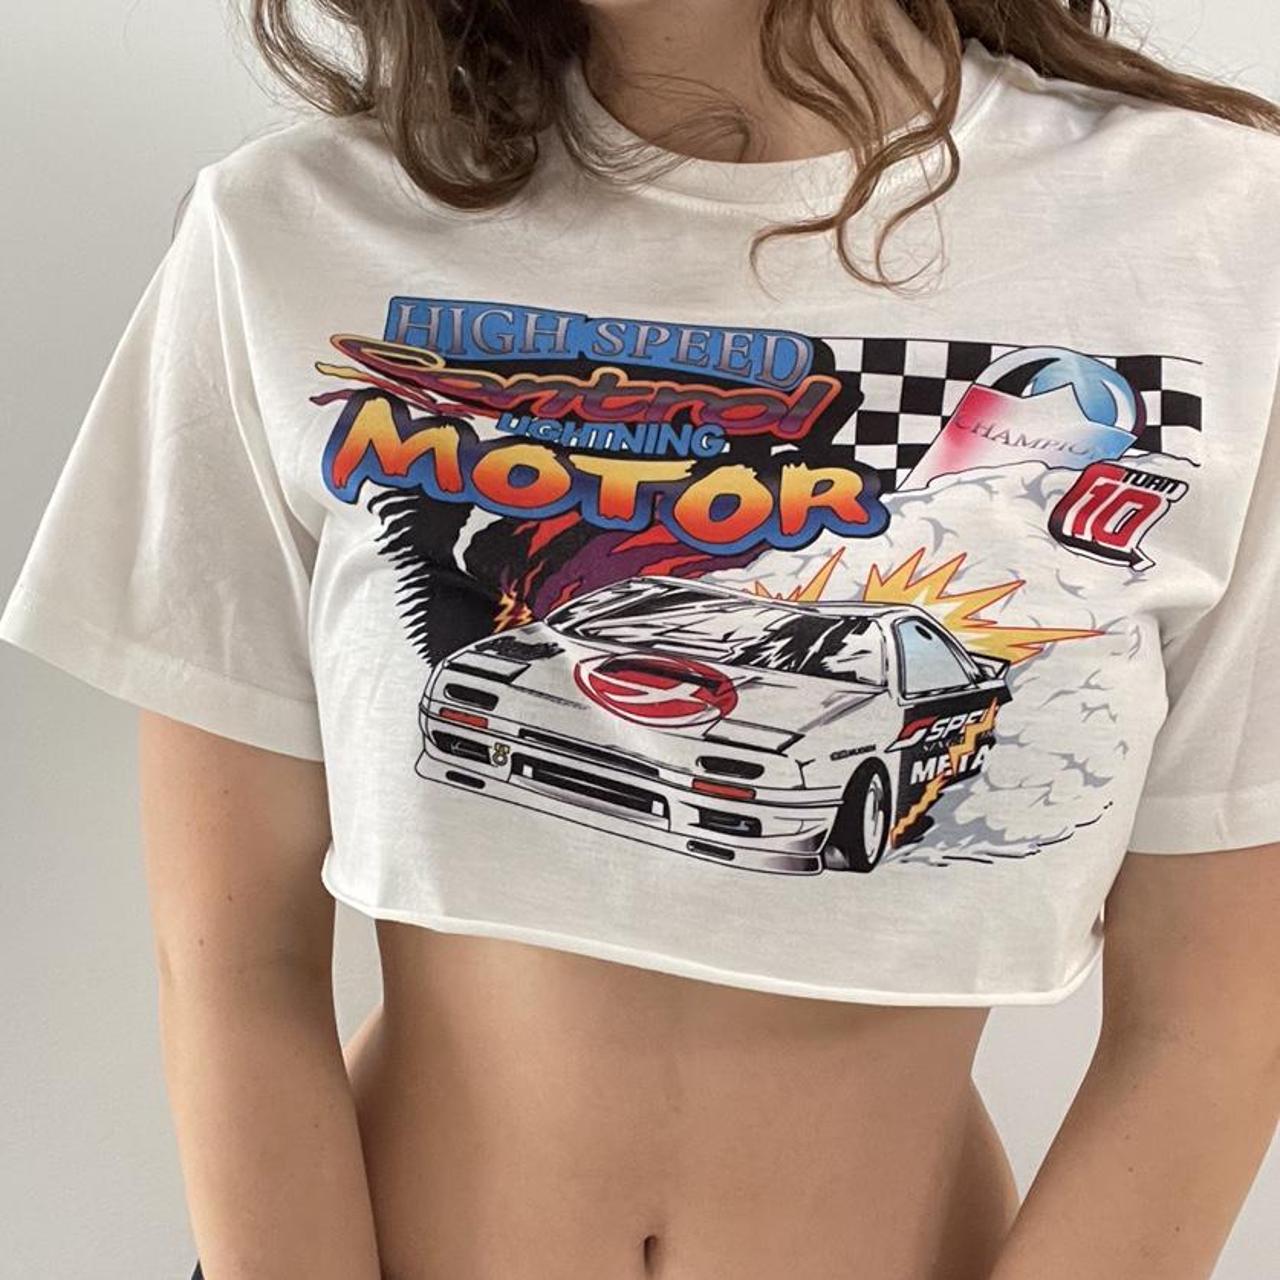 Product Image 1 - Cropped graphic car top
Size M
Brand